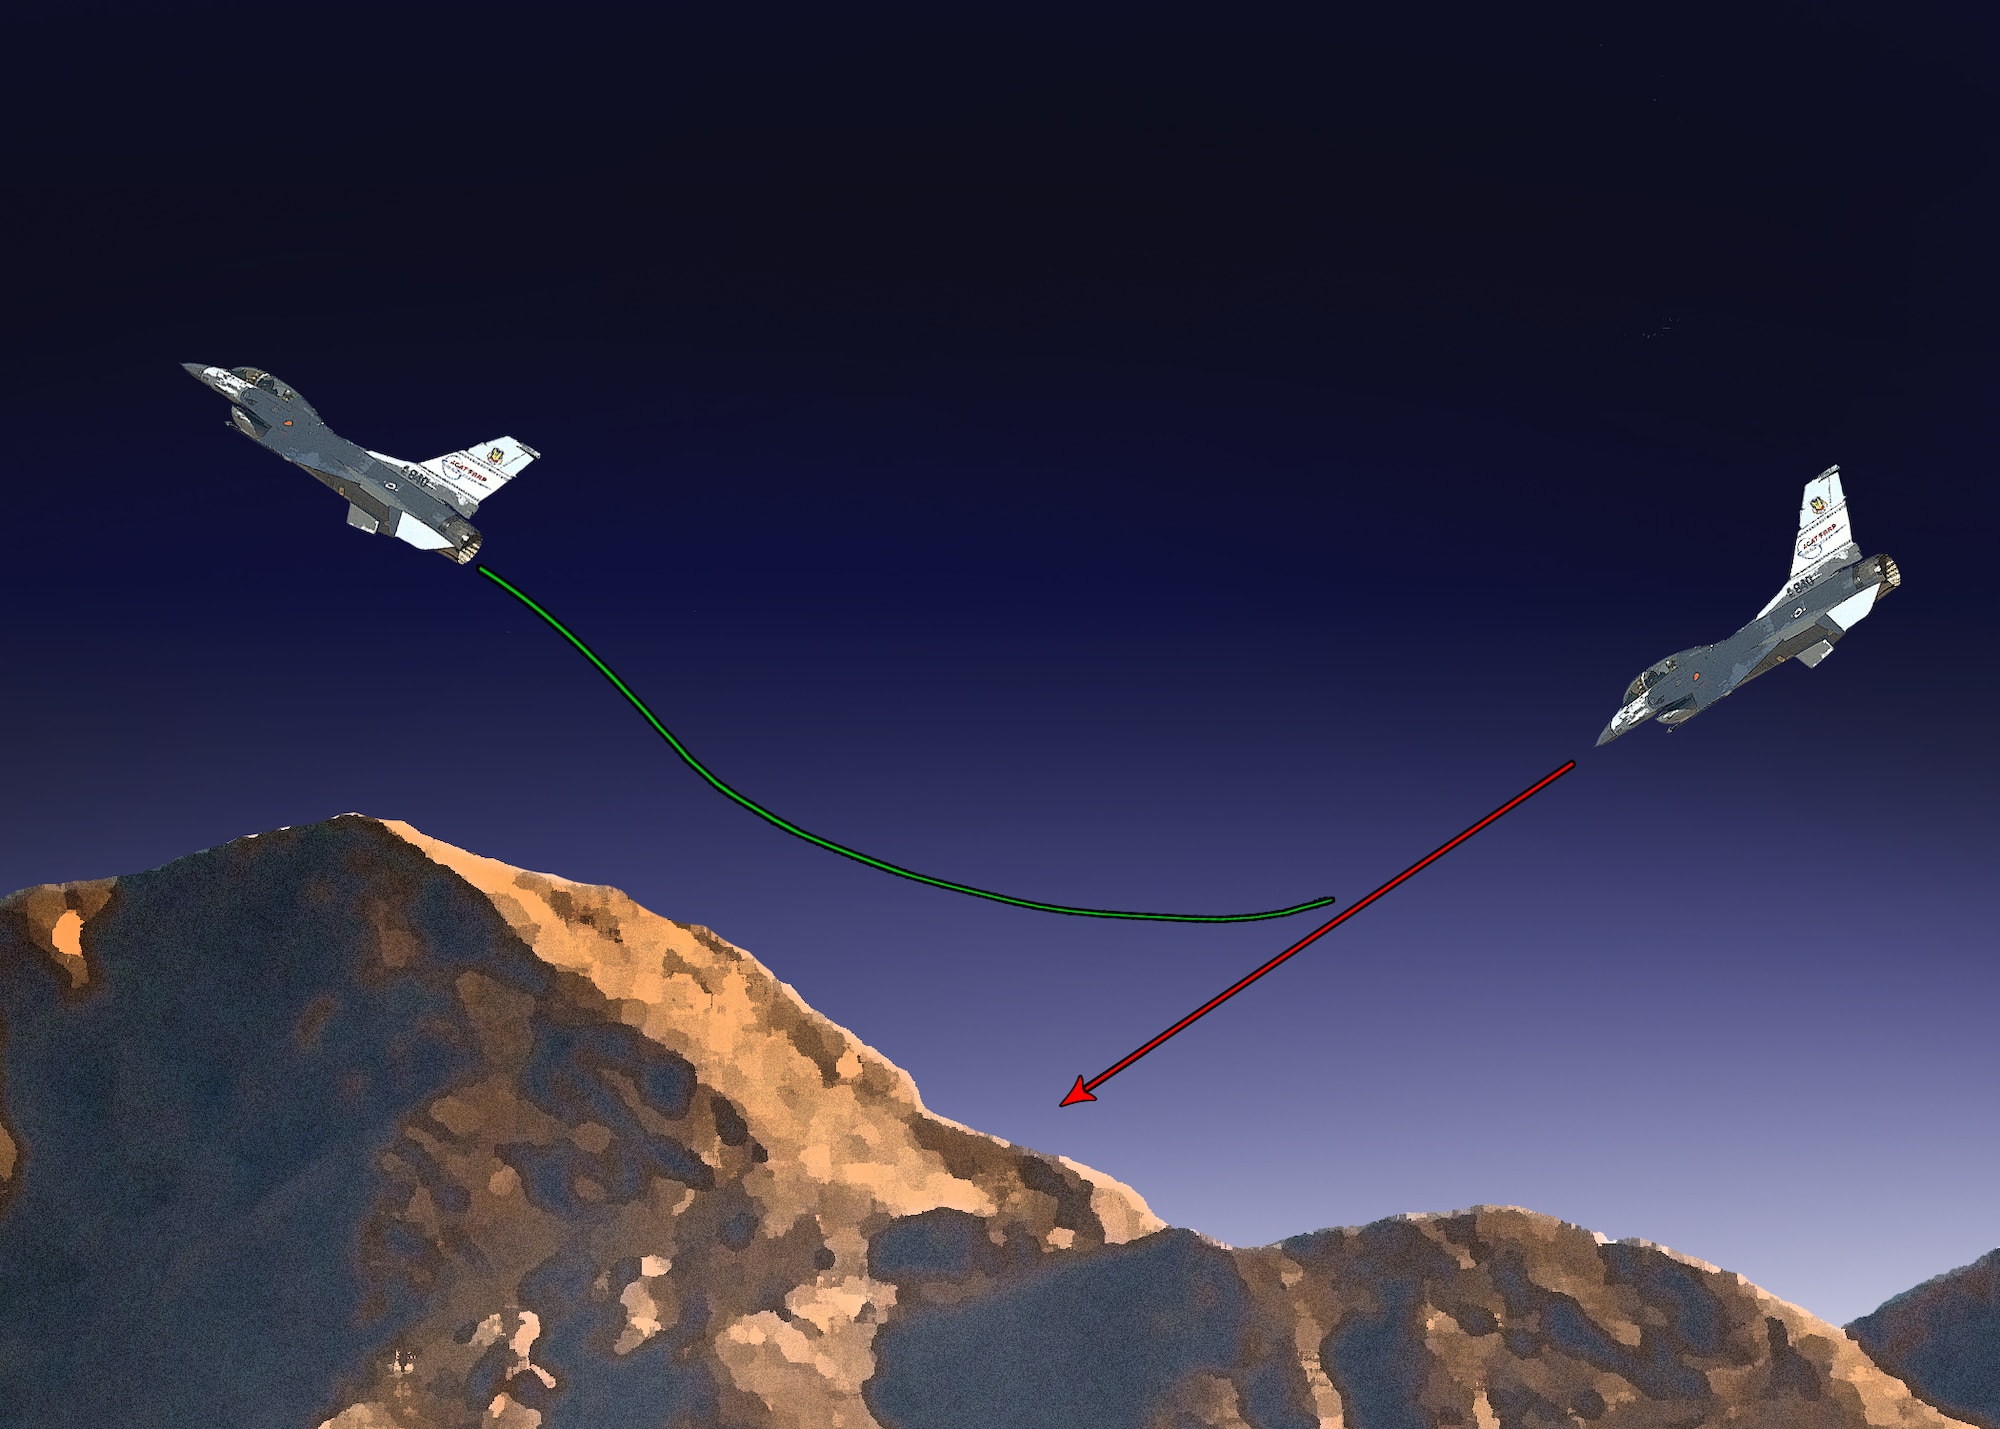 The Automatic Ground Collision Avoidance System is designed to prevent Controlled Flight Into Terrain mishaps by executing an automatic recovery maneuver when terrain impact is imminent. The system predicts CFIT conditions by means of a continuous comparison between a trajectory prediction and a terrain profile that is generated from onboard terrain elevation data. At the instant the predicted trajectory touches the terrain profile; the automatic recovery is executed by the Auto GCAS autopilot. The automatic recovery consists of an abrupt roll-to-upright and a nominal 5-g pull until terrain clearance is assured. The Auto GCAS recovery maneuver can be terminated at any time by the pilot. (U.S. Air Force graphic by Jet Fabara)